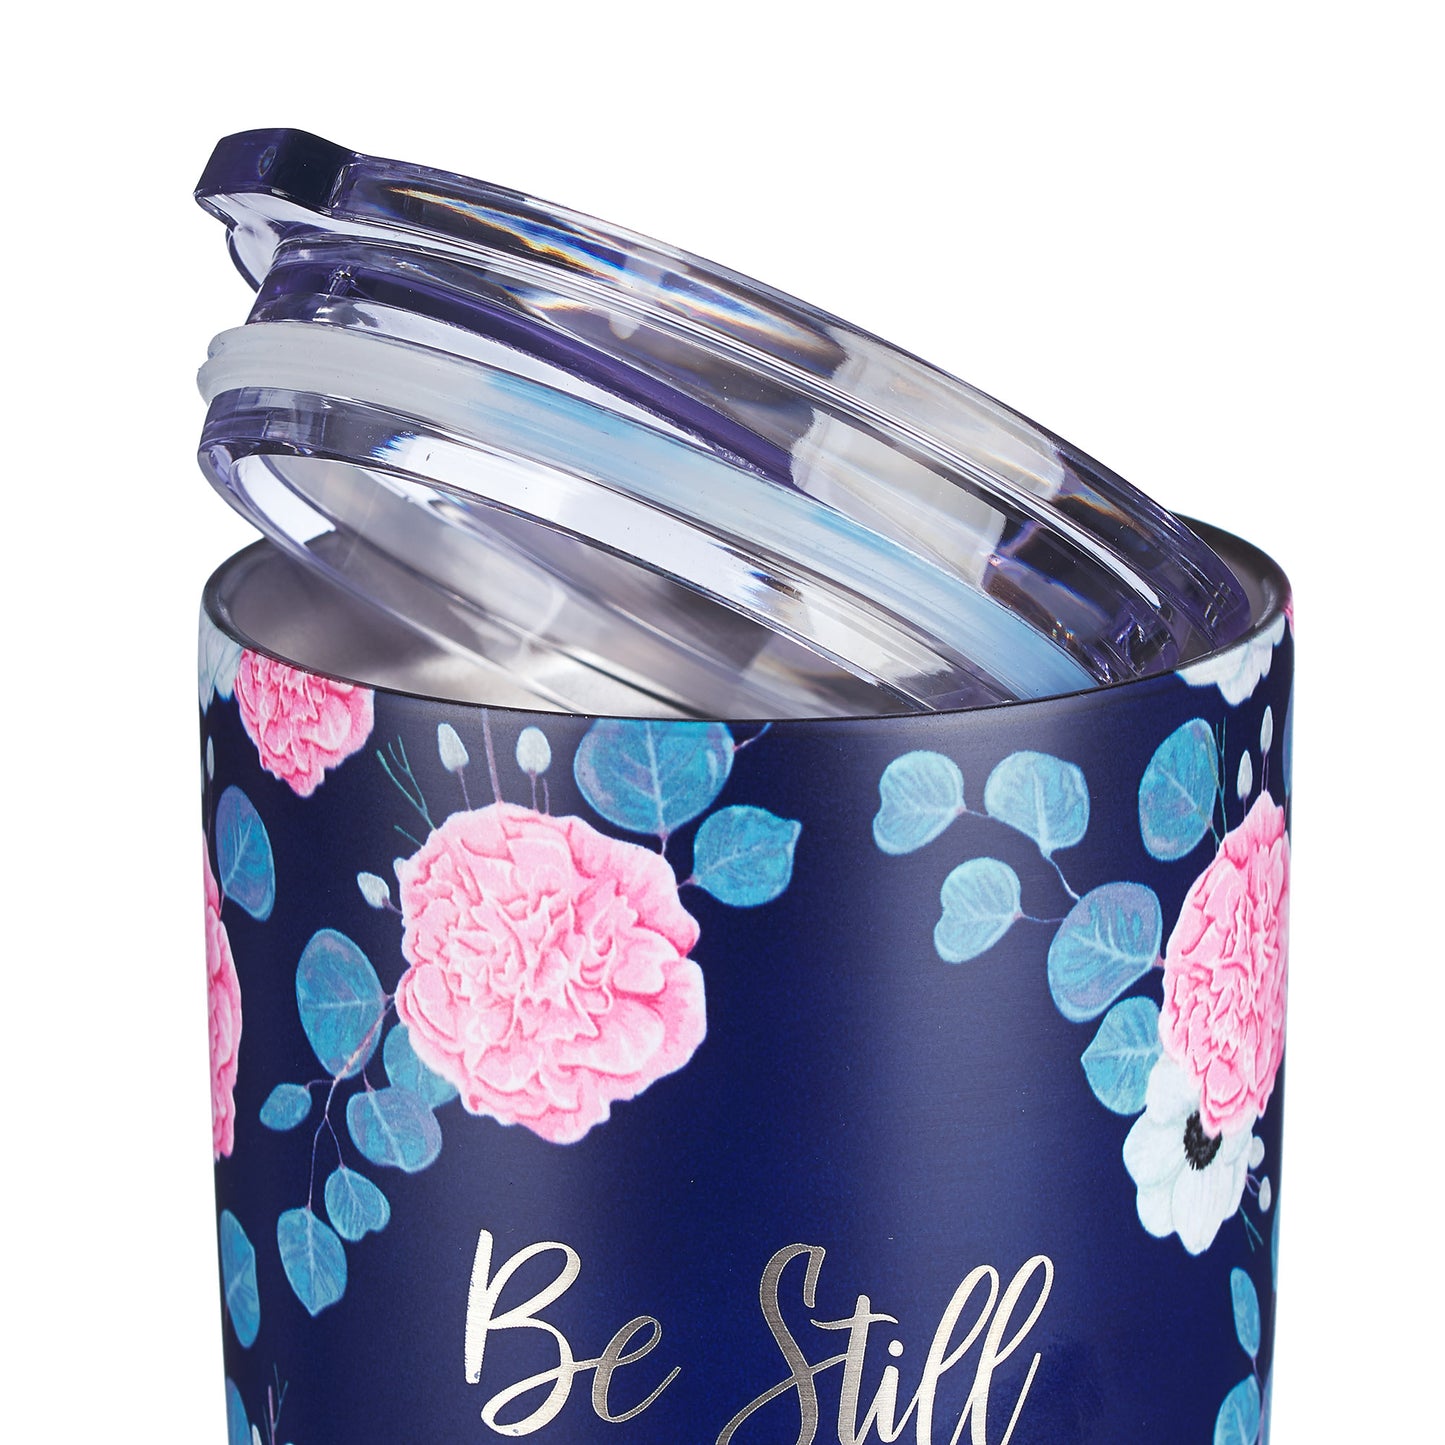 Be Still & Know Stainless Steel Mug - Psalm 46:10 - The Christian Gift Company